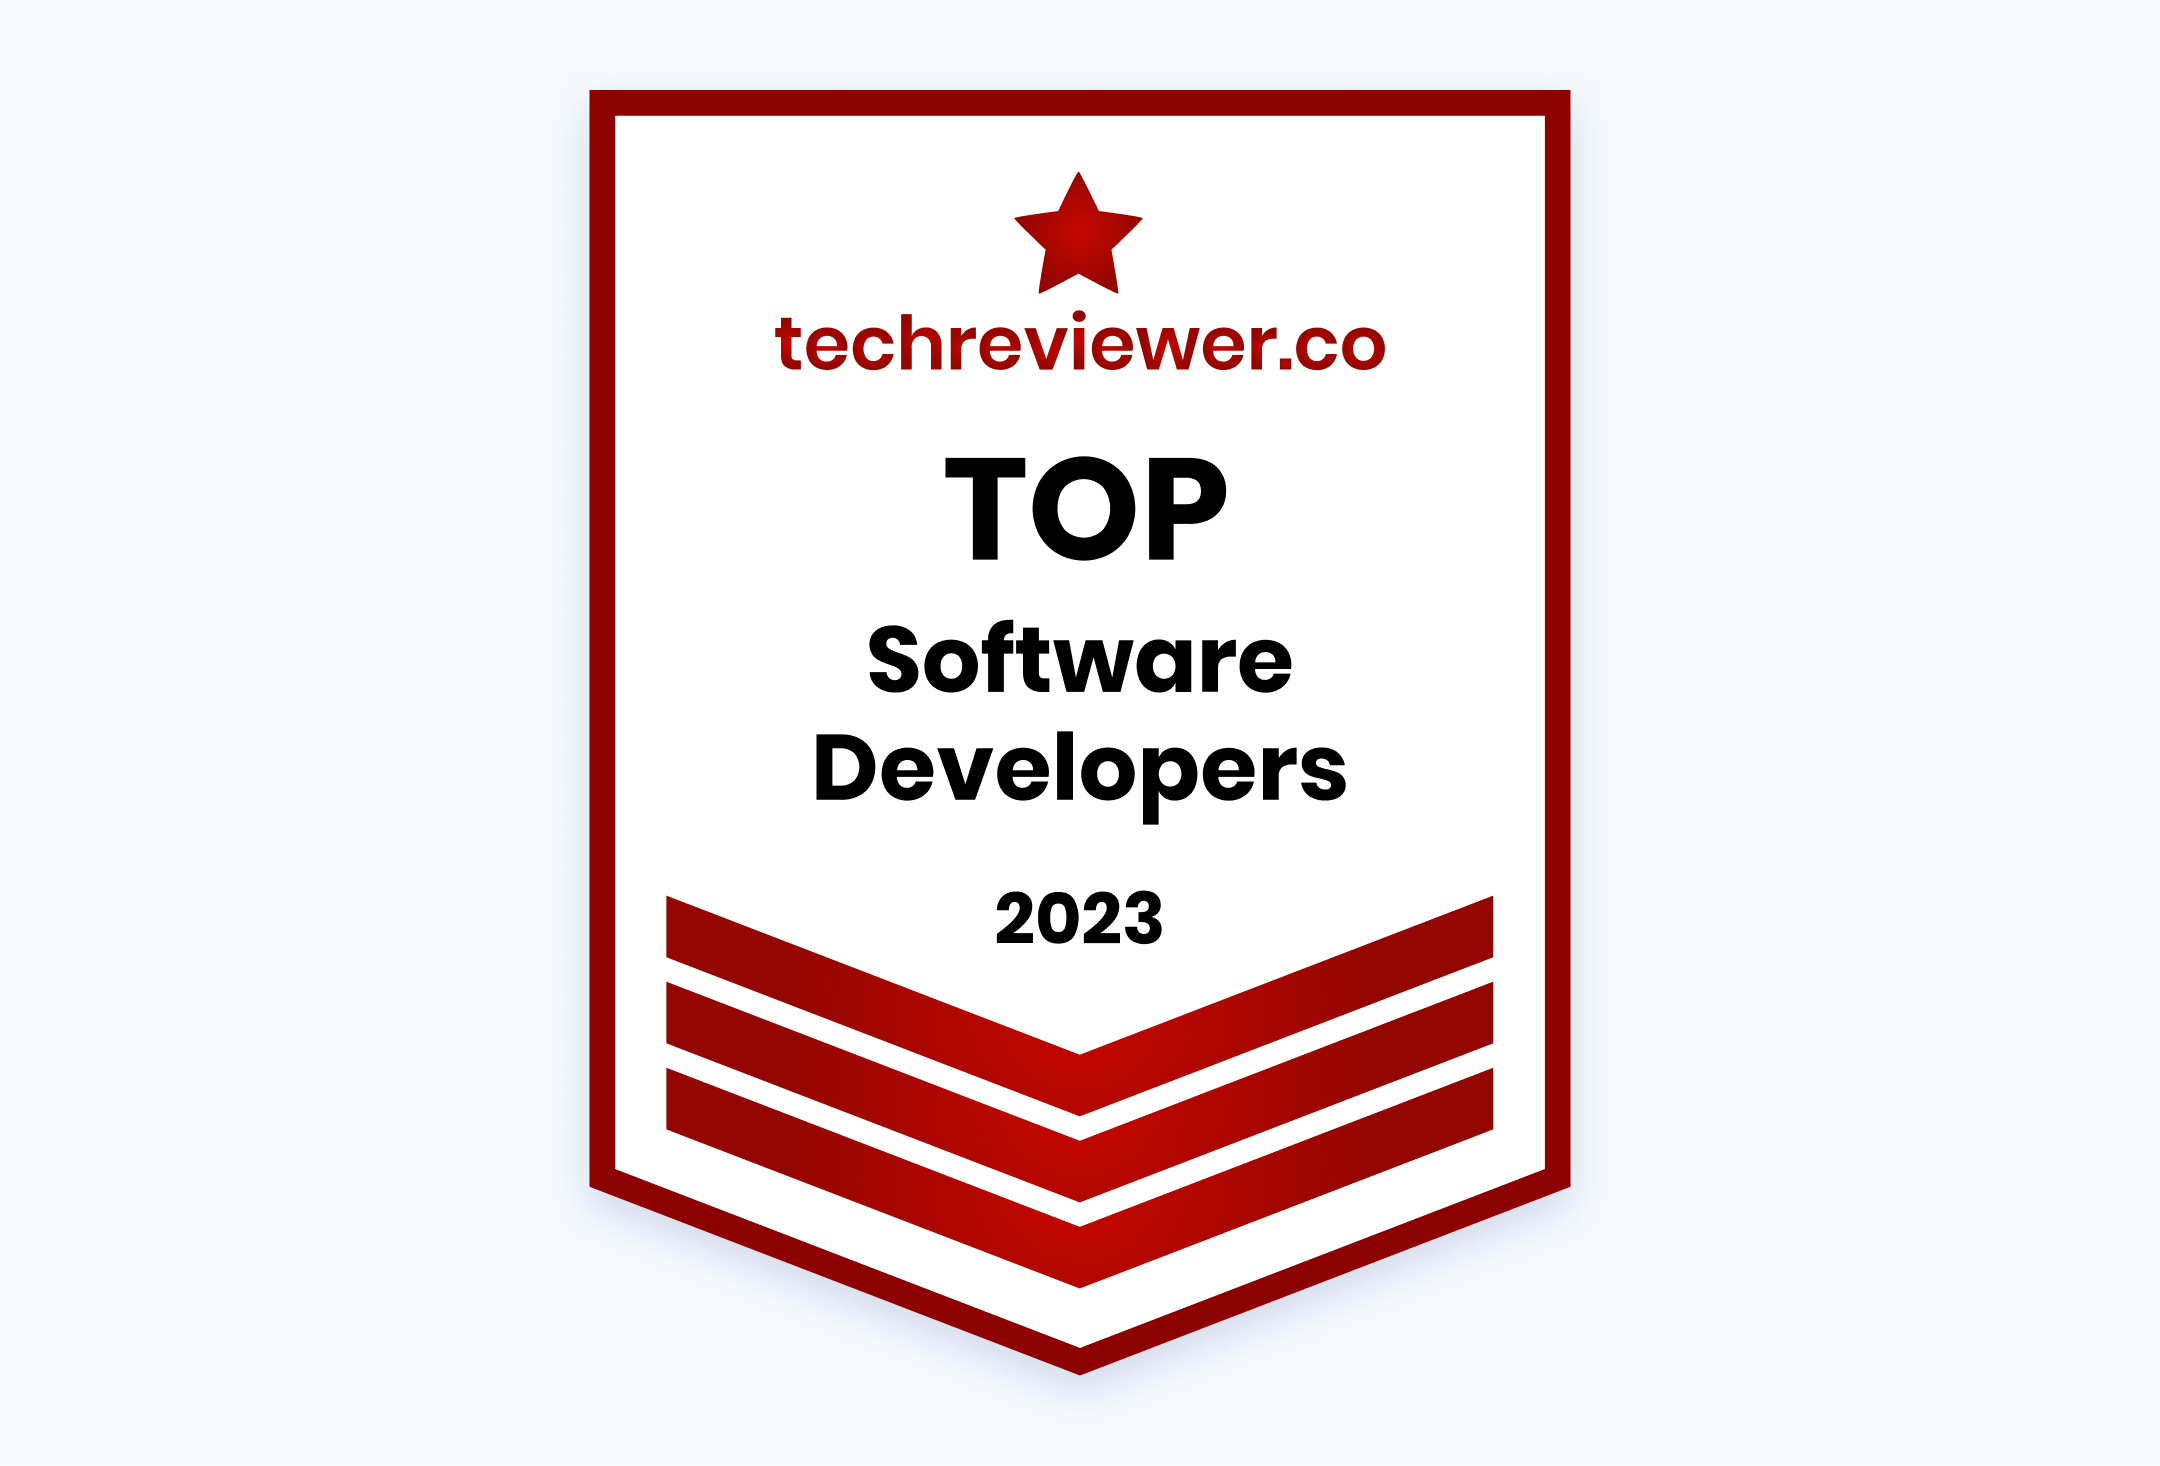 Erbis has been recognized as the Top Software Developers of 2023 by Techreviewer